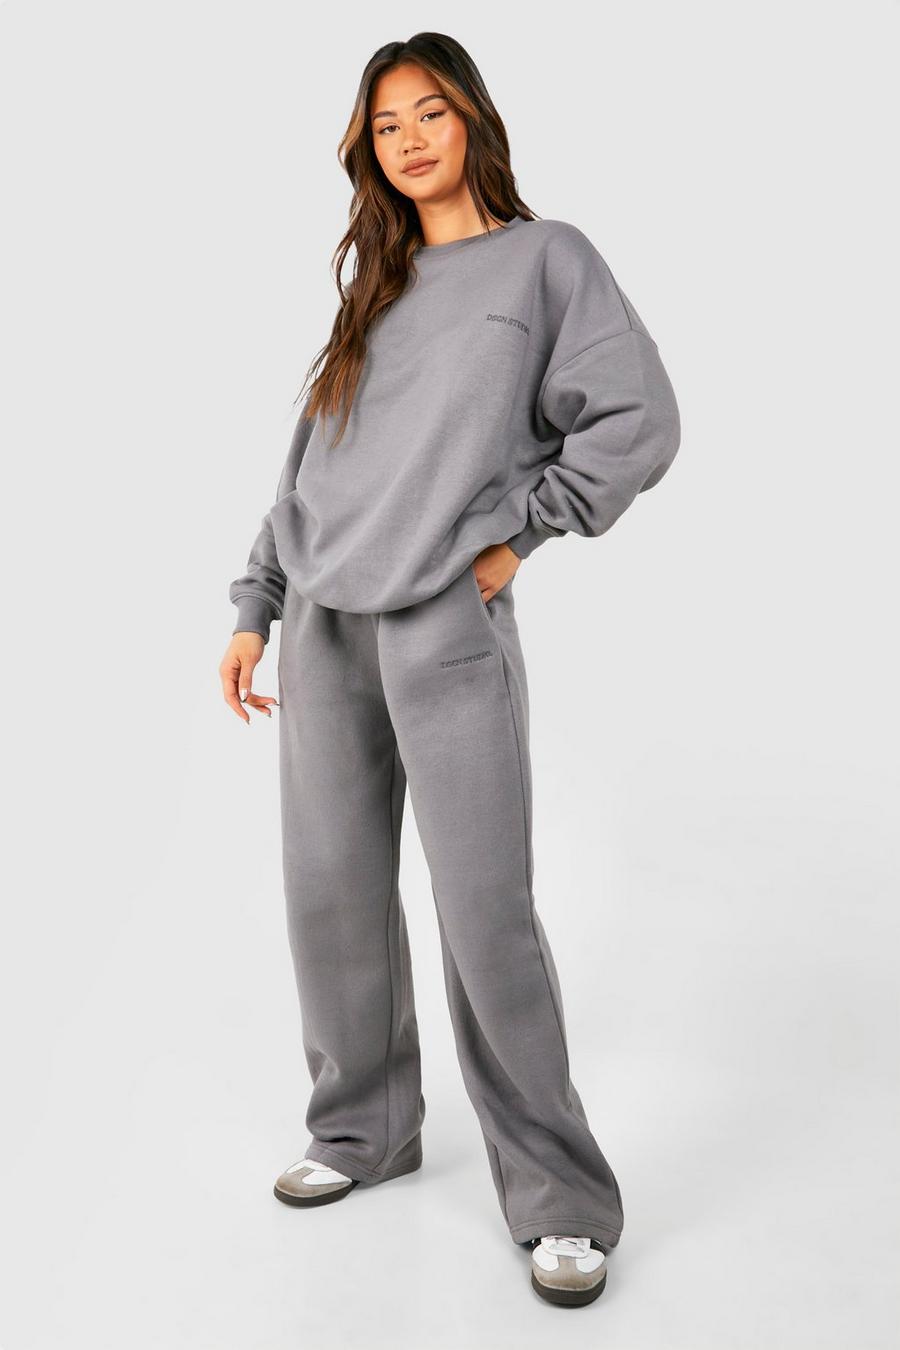 Charcoal Dsgn Studio Embroidered Sweatshirt And Straight Leg Track Pants Tracksuit